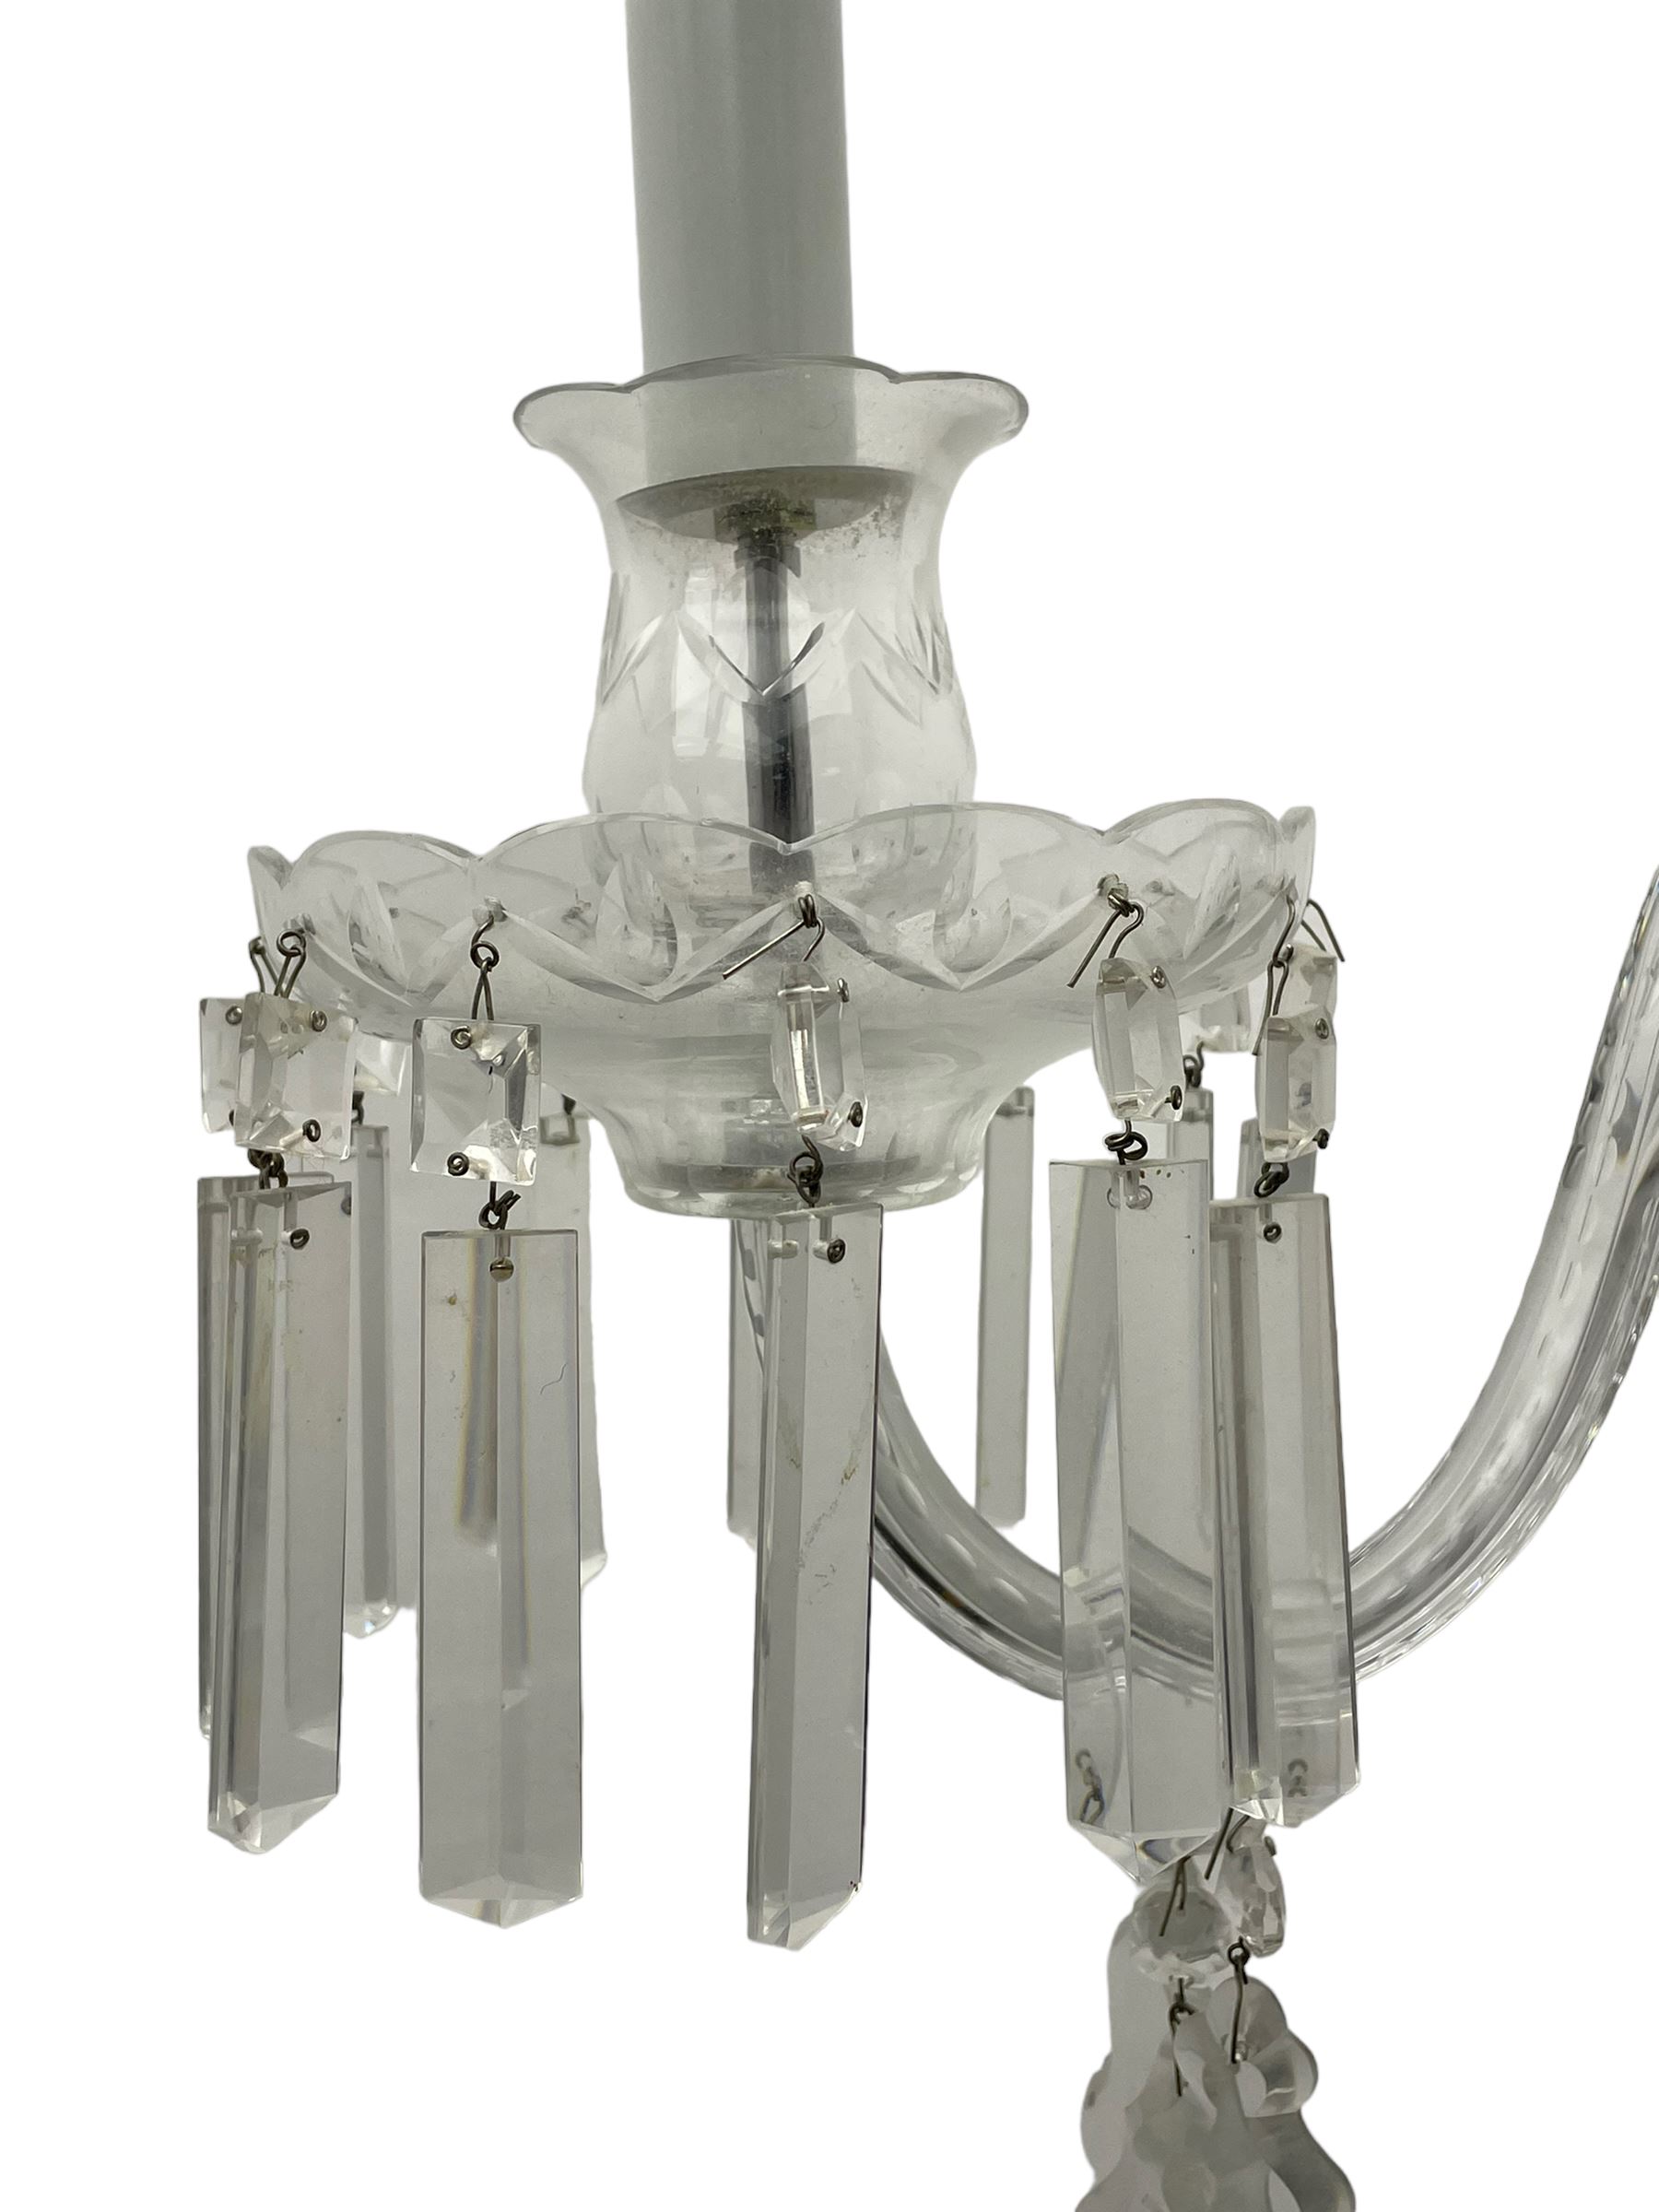 Pair of cut glass two branch wall sconce candelabras - Image 9 of 10